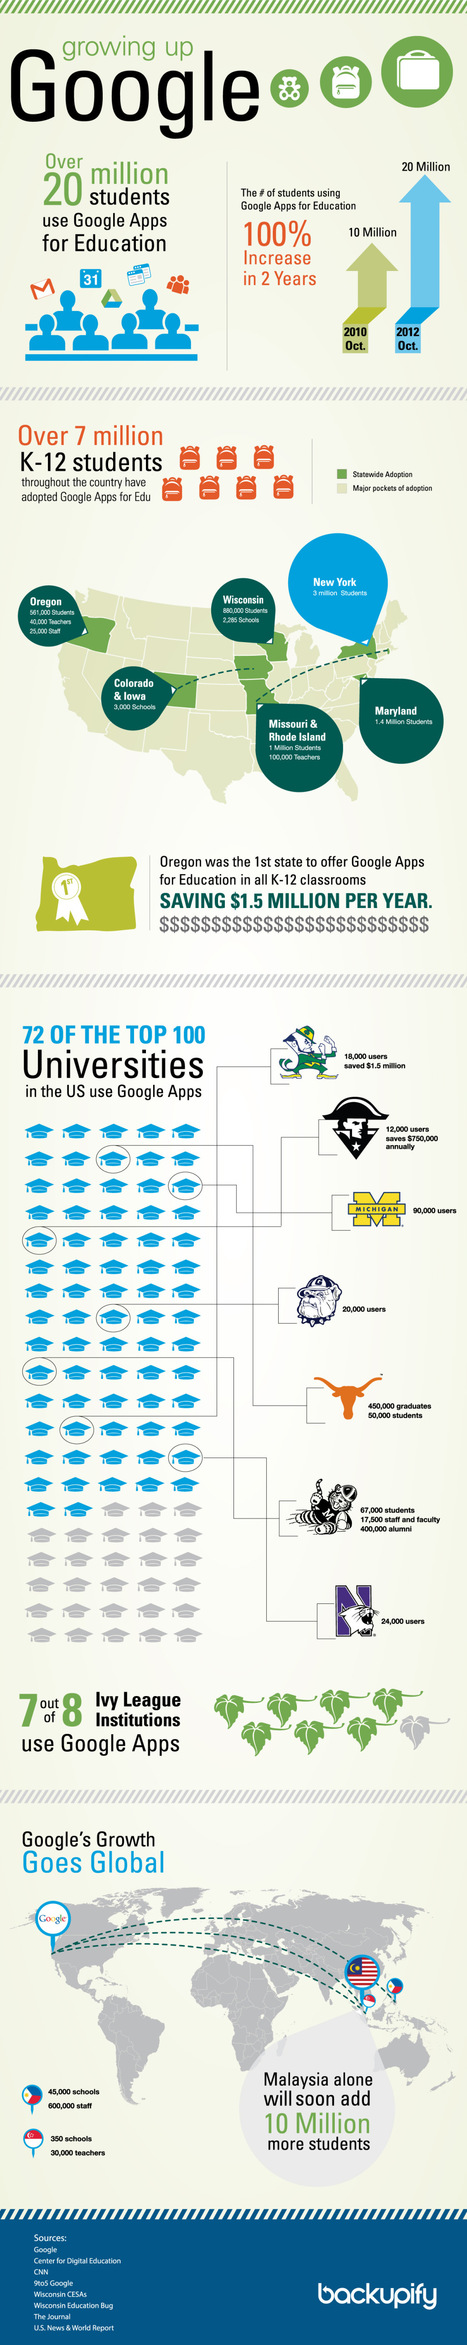 Schooled by Google: How Google Apps is penetrating education [infographic] | Strictly pedagogical | Scoop.it